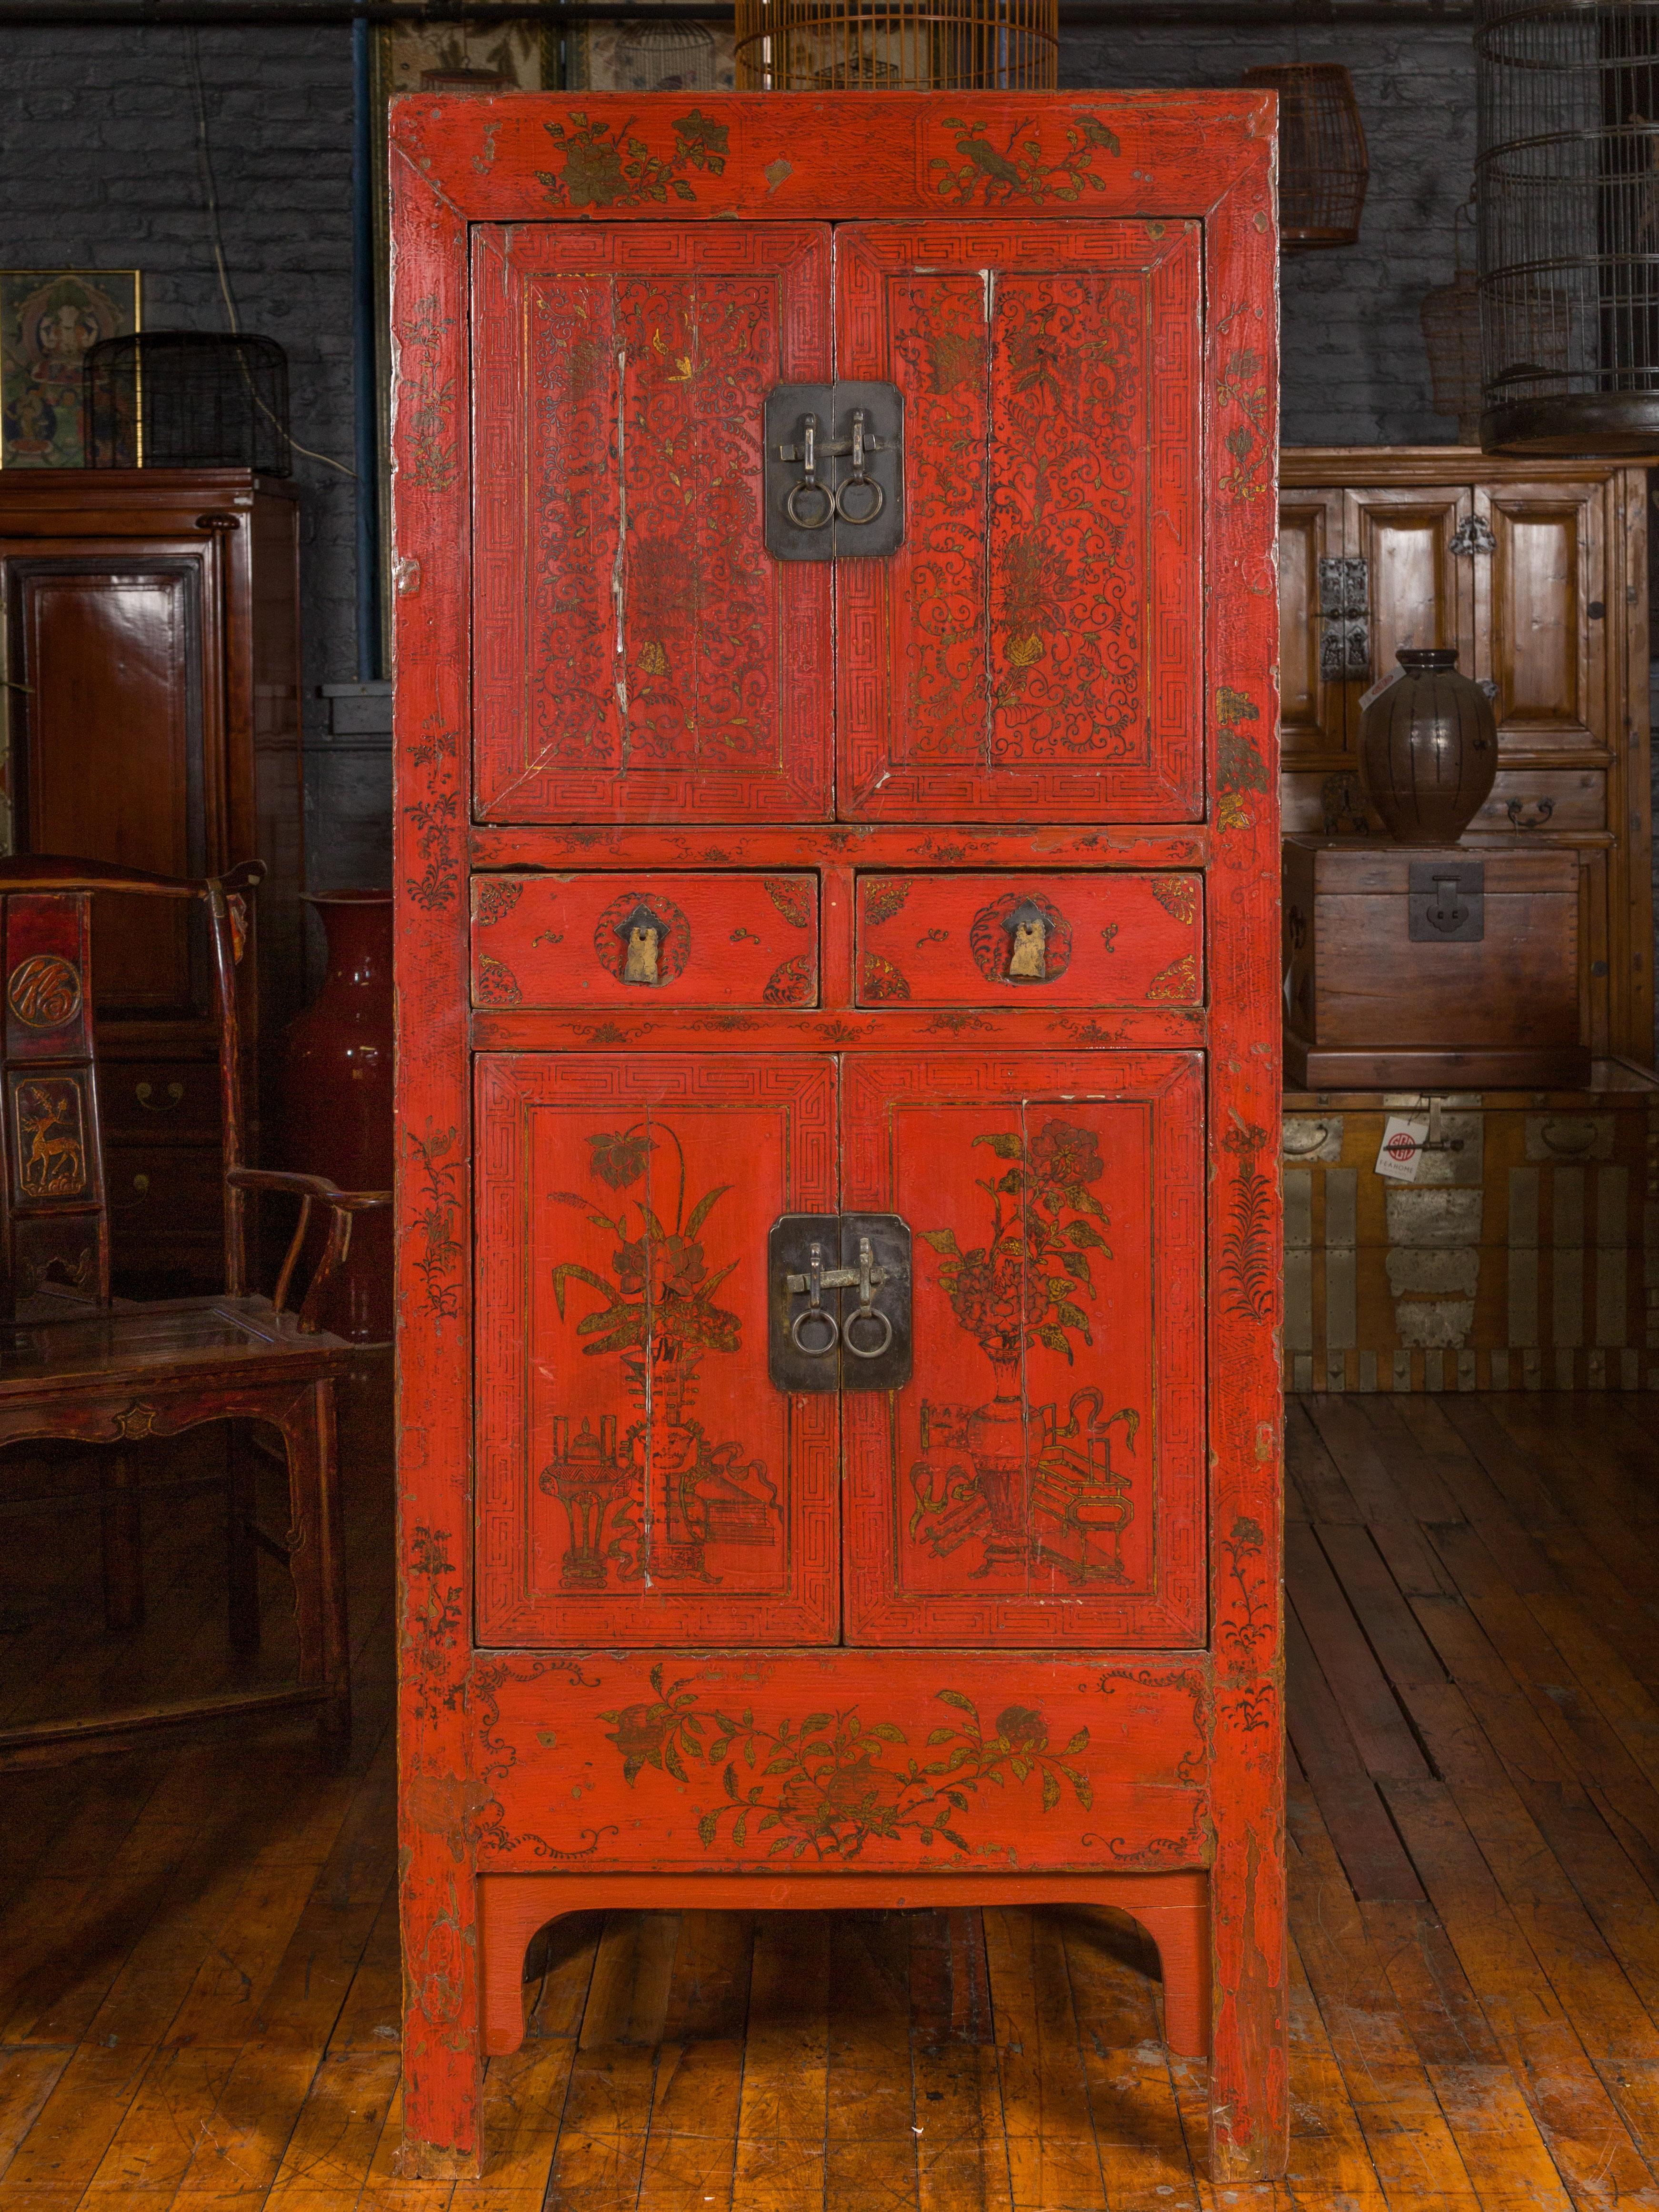 A Chinese Qing dynasty red lacquered cabinet from the 19th century, with distressed gold floral decor, doors and drawers. Crafted in China during the Qing dynasty, this tall cabinet features a red lacquered ground delicately accented with distressed